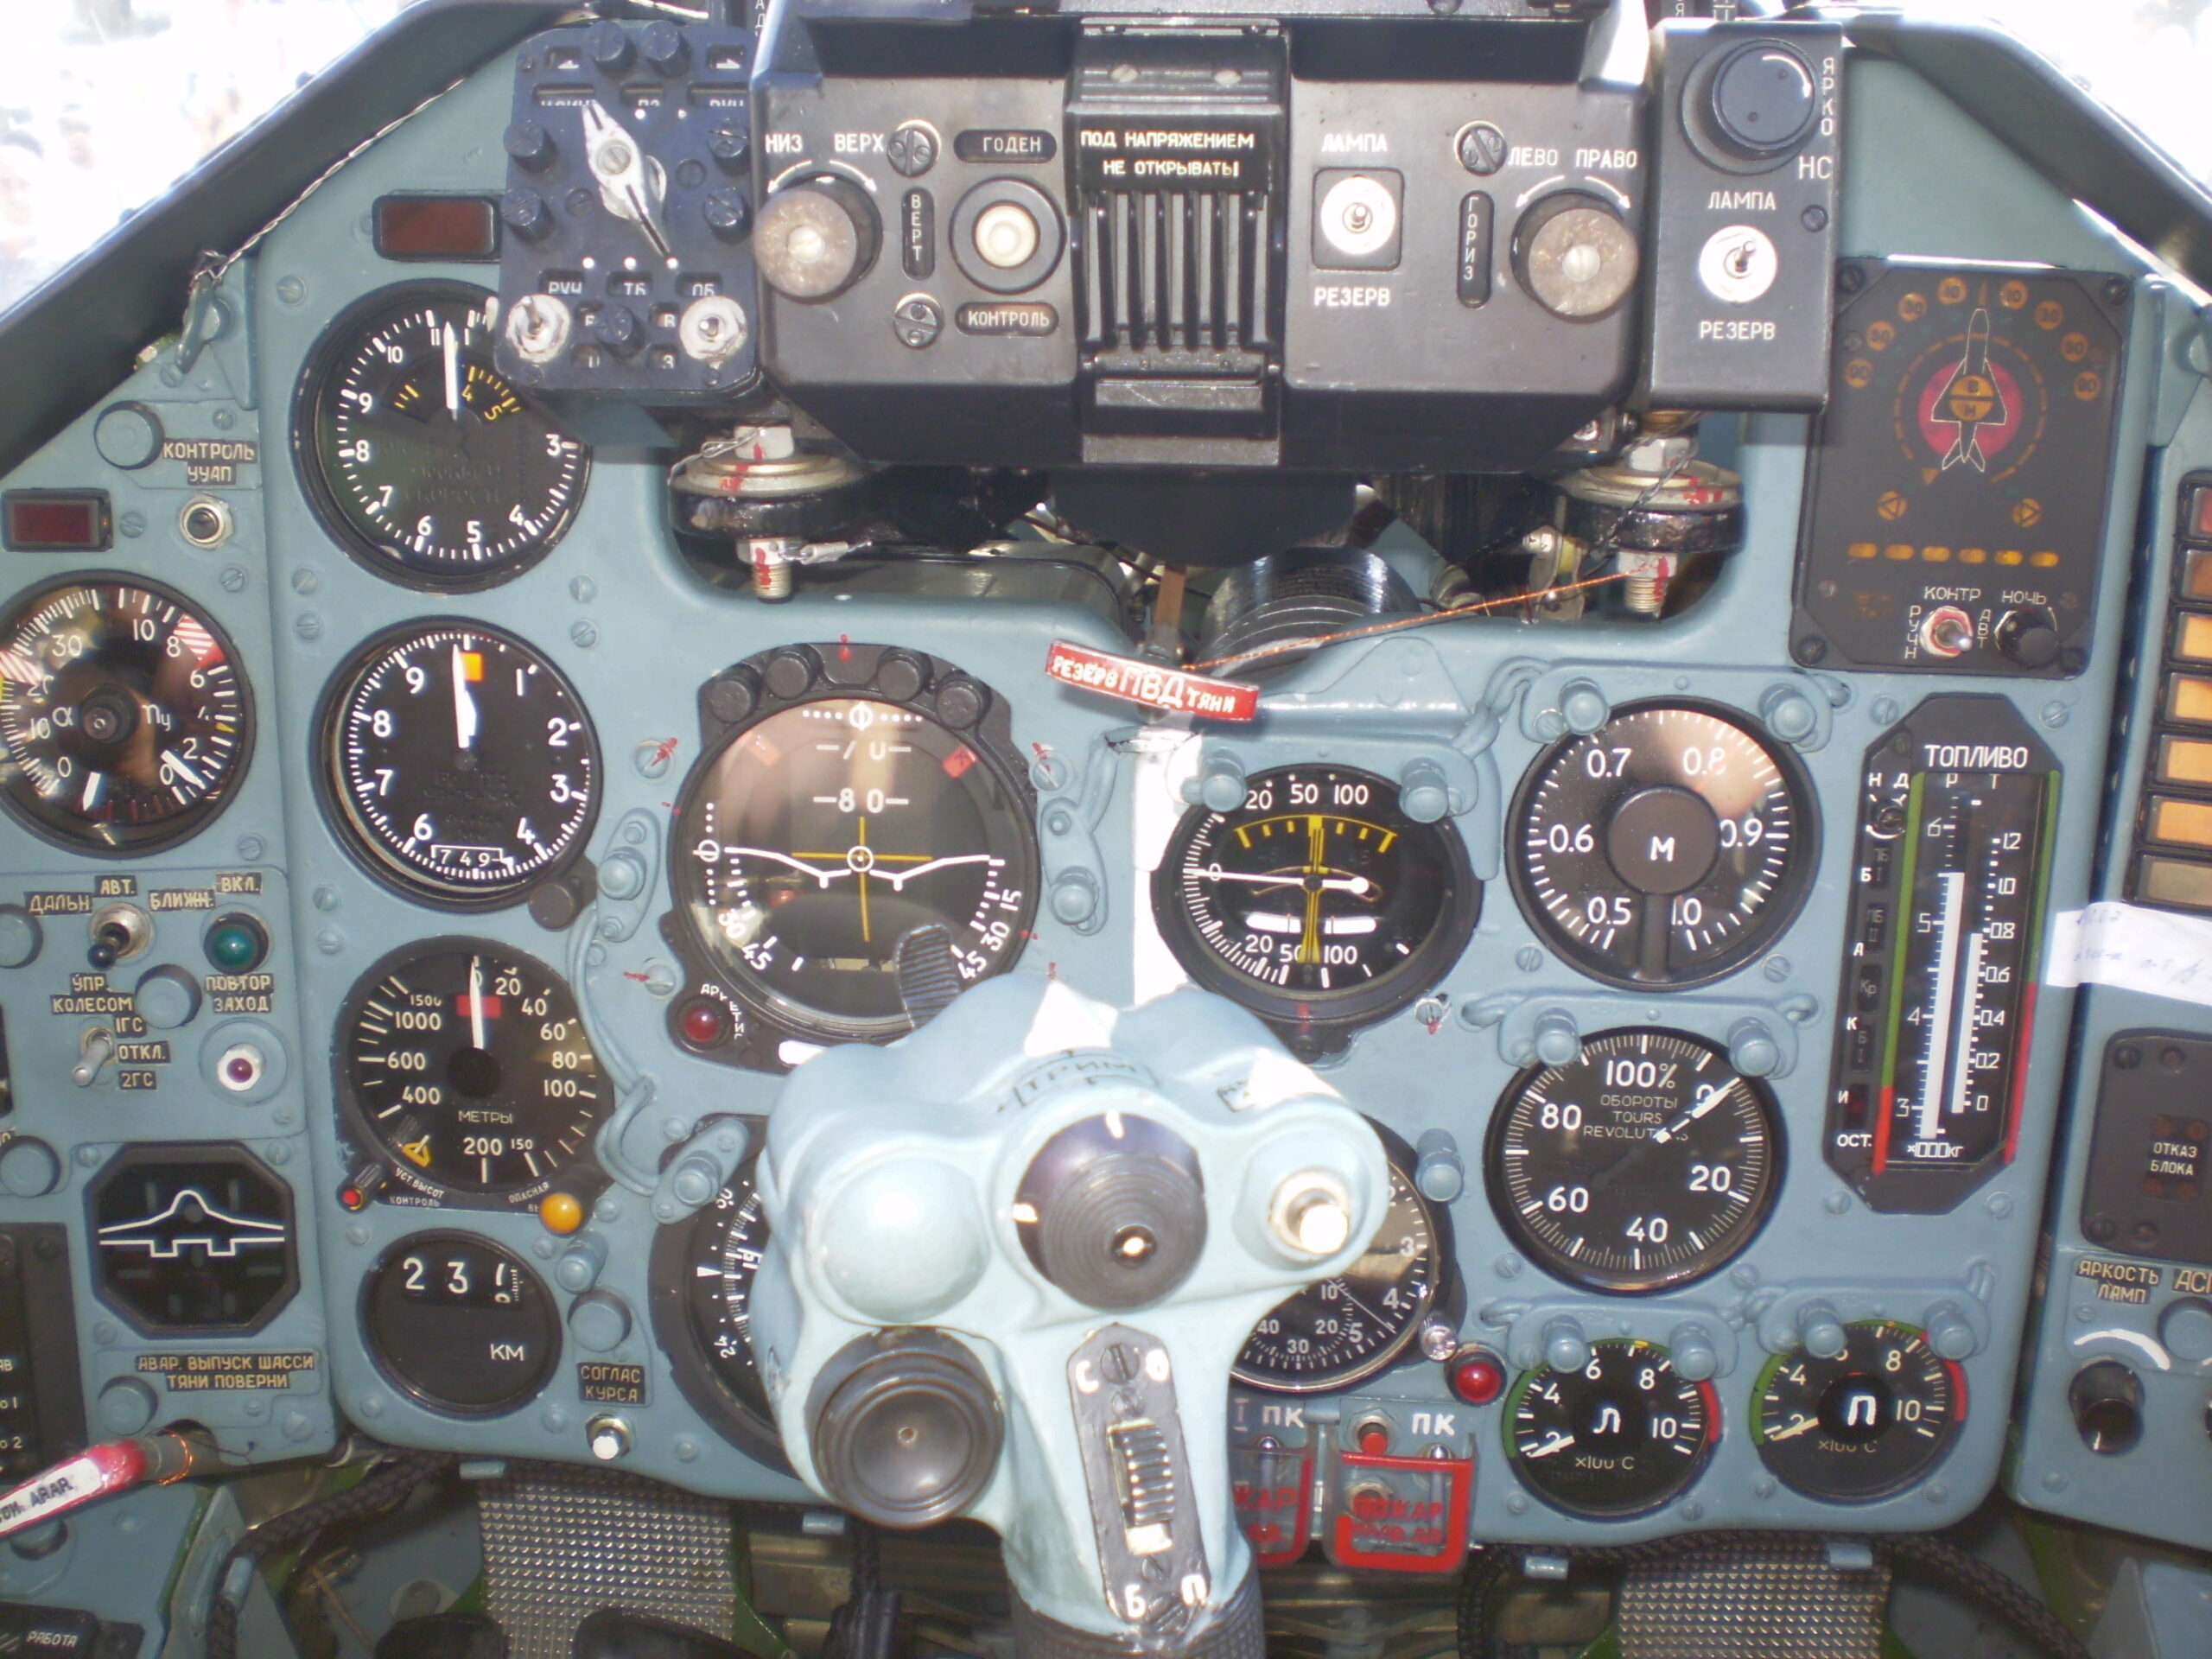 The cockpit of the Su-25 is very cramped.